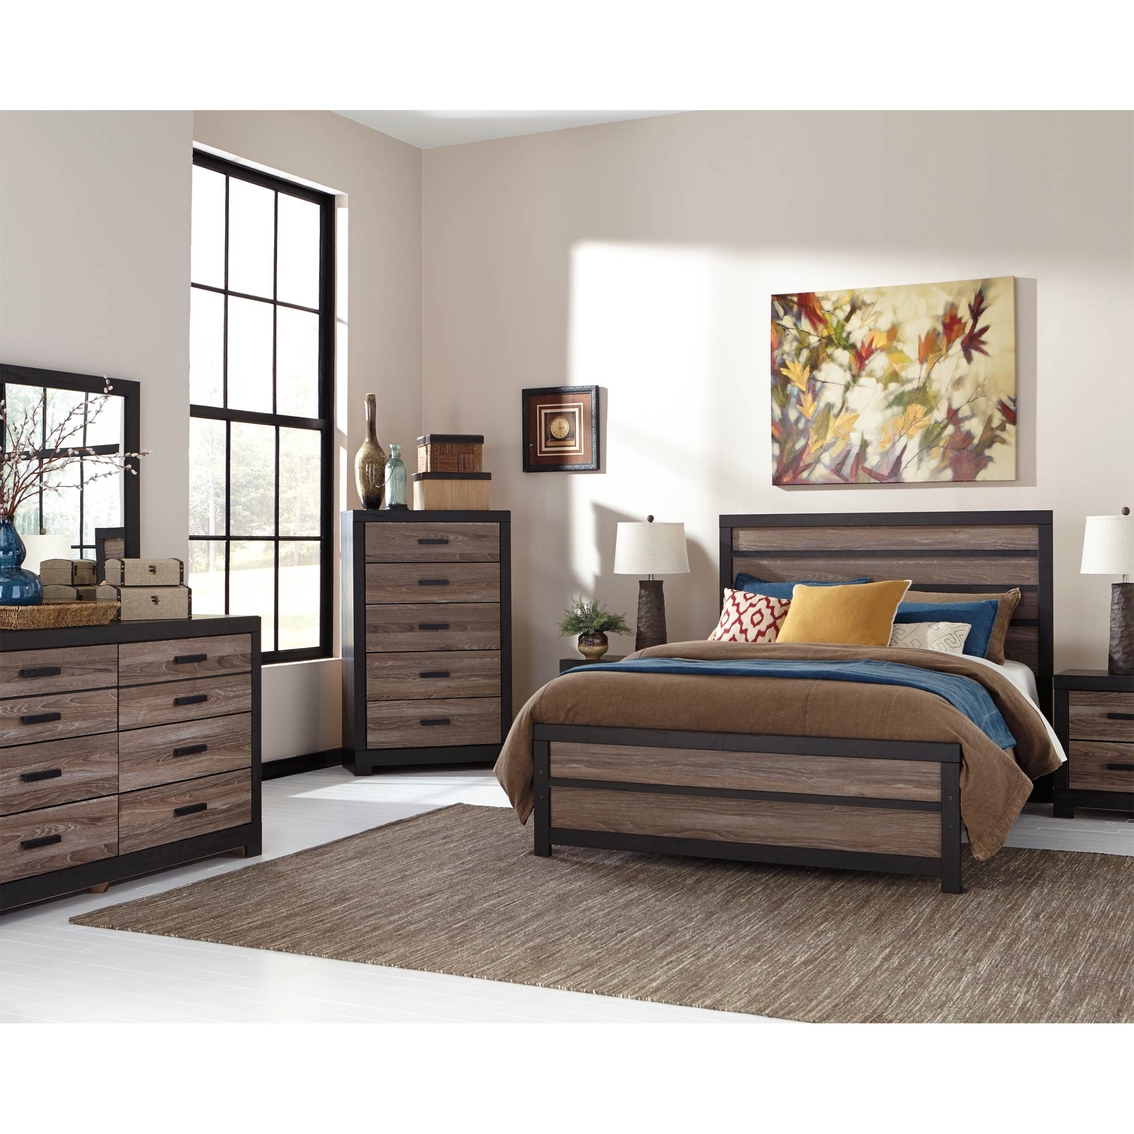 Signature Design by Ashley Harlinton Bed - Image 4 of 4